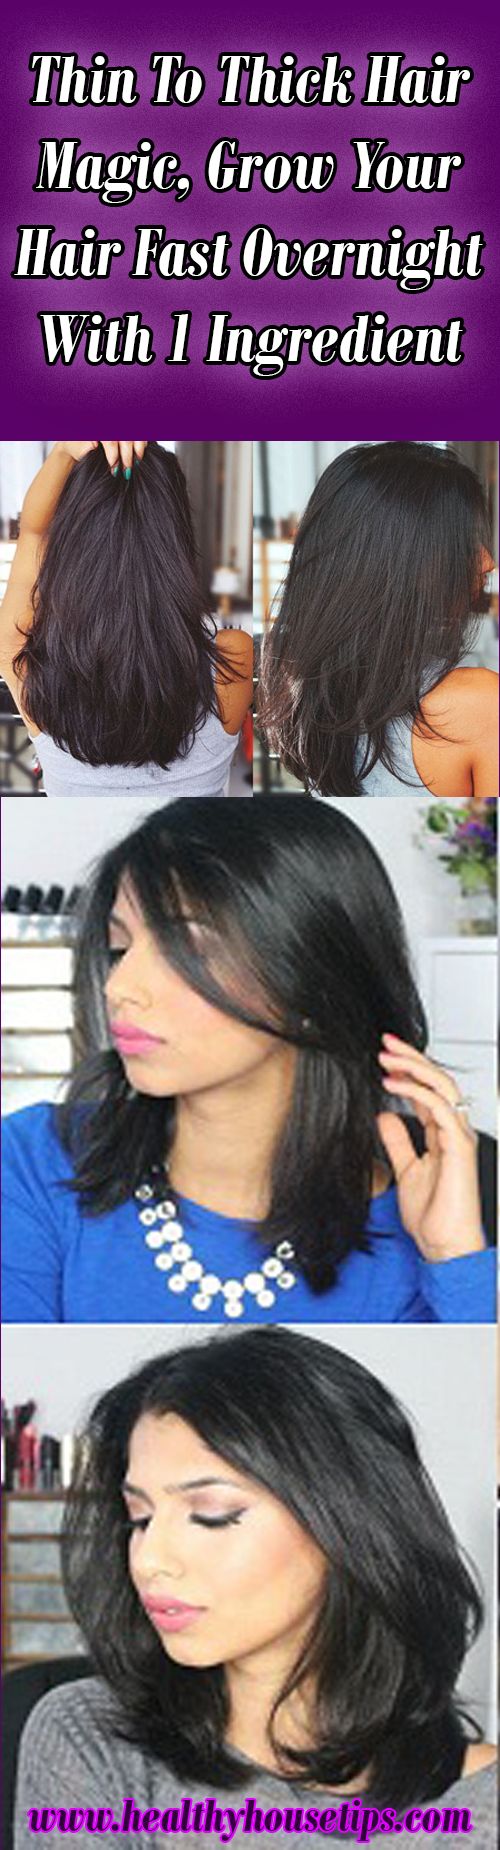 Thin To Thick Hair Magic, Grow Your Hair Fast Overnight With 1 Ingredient